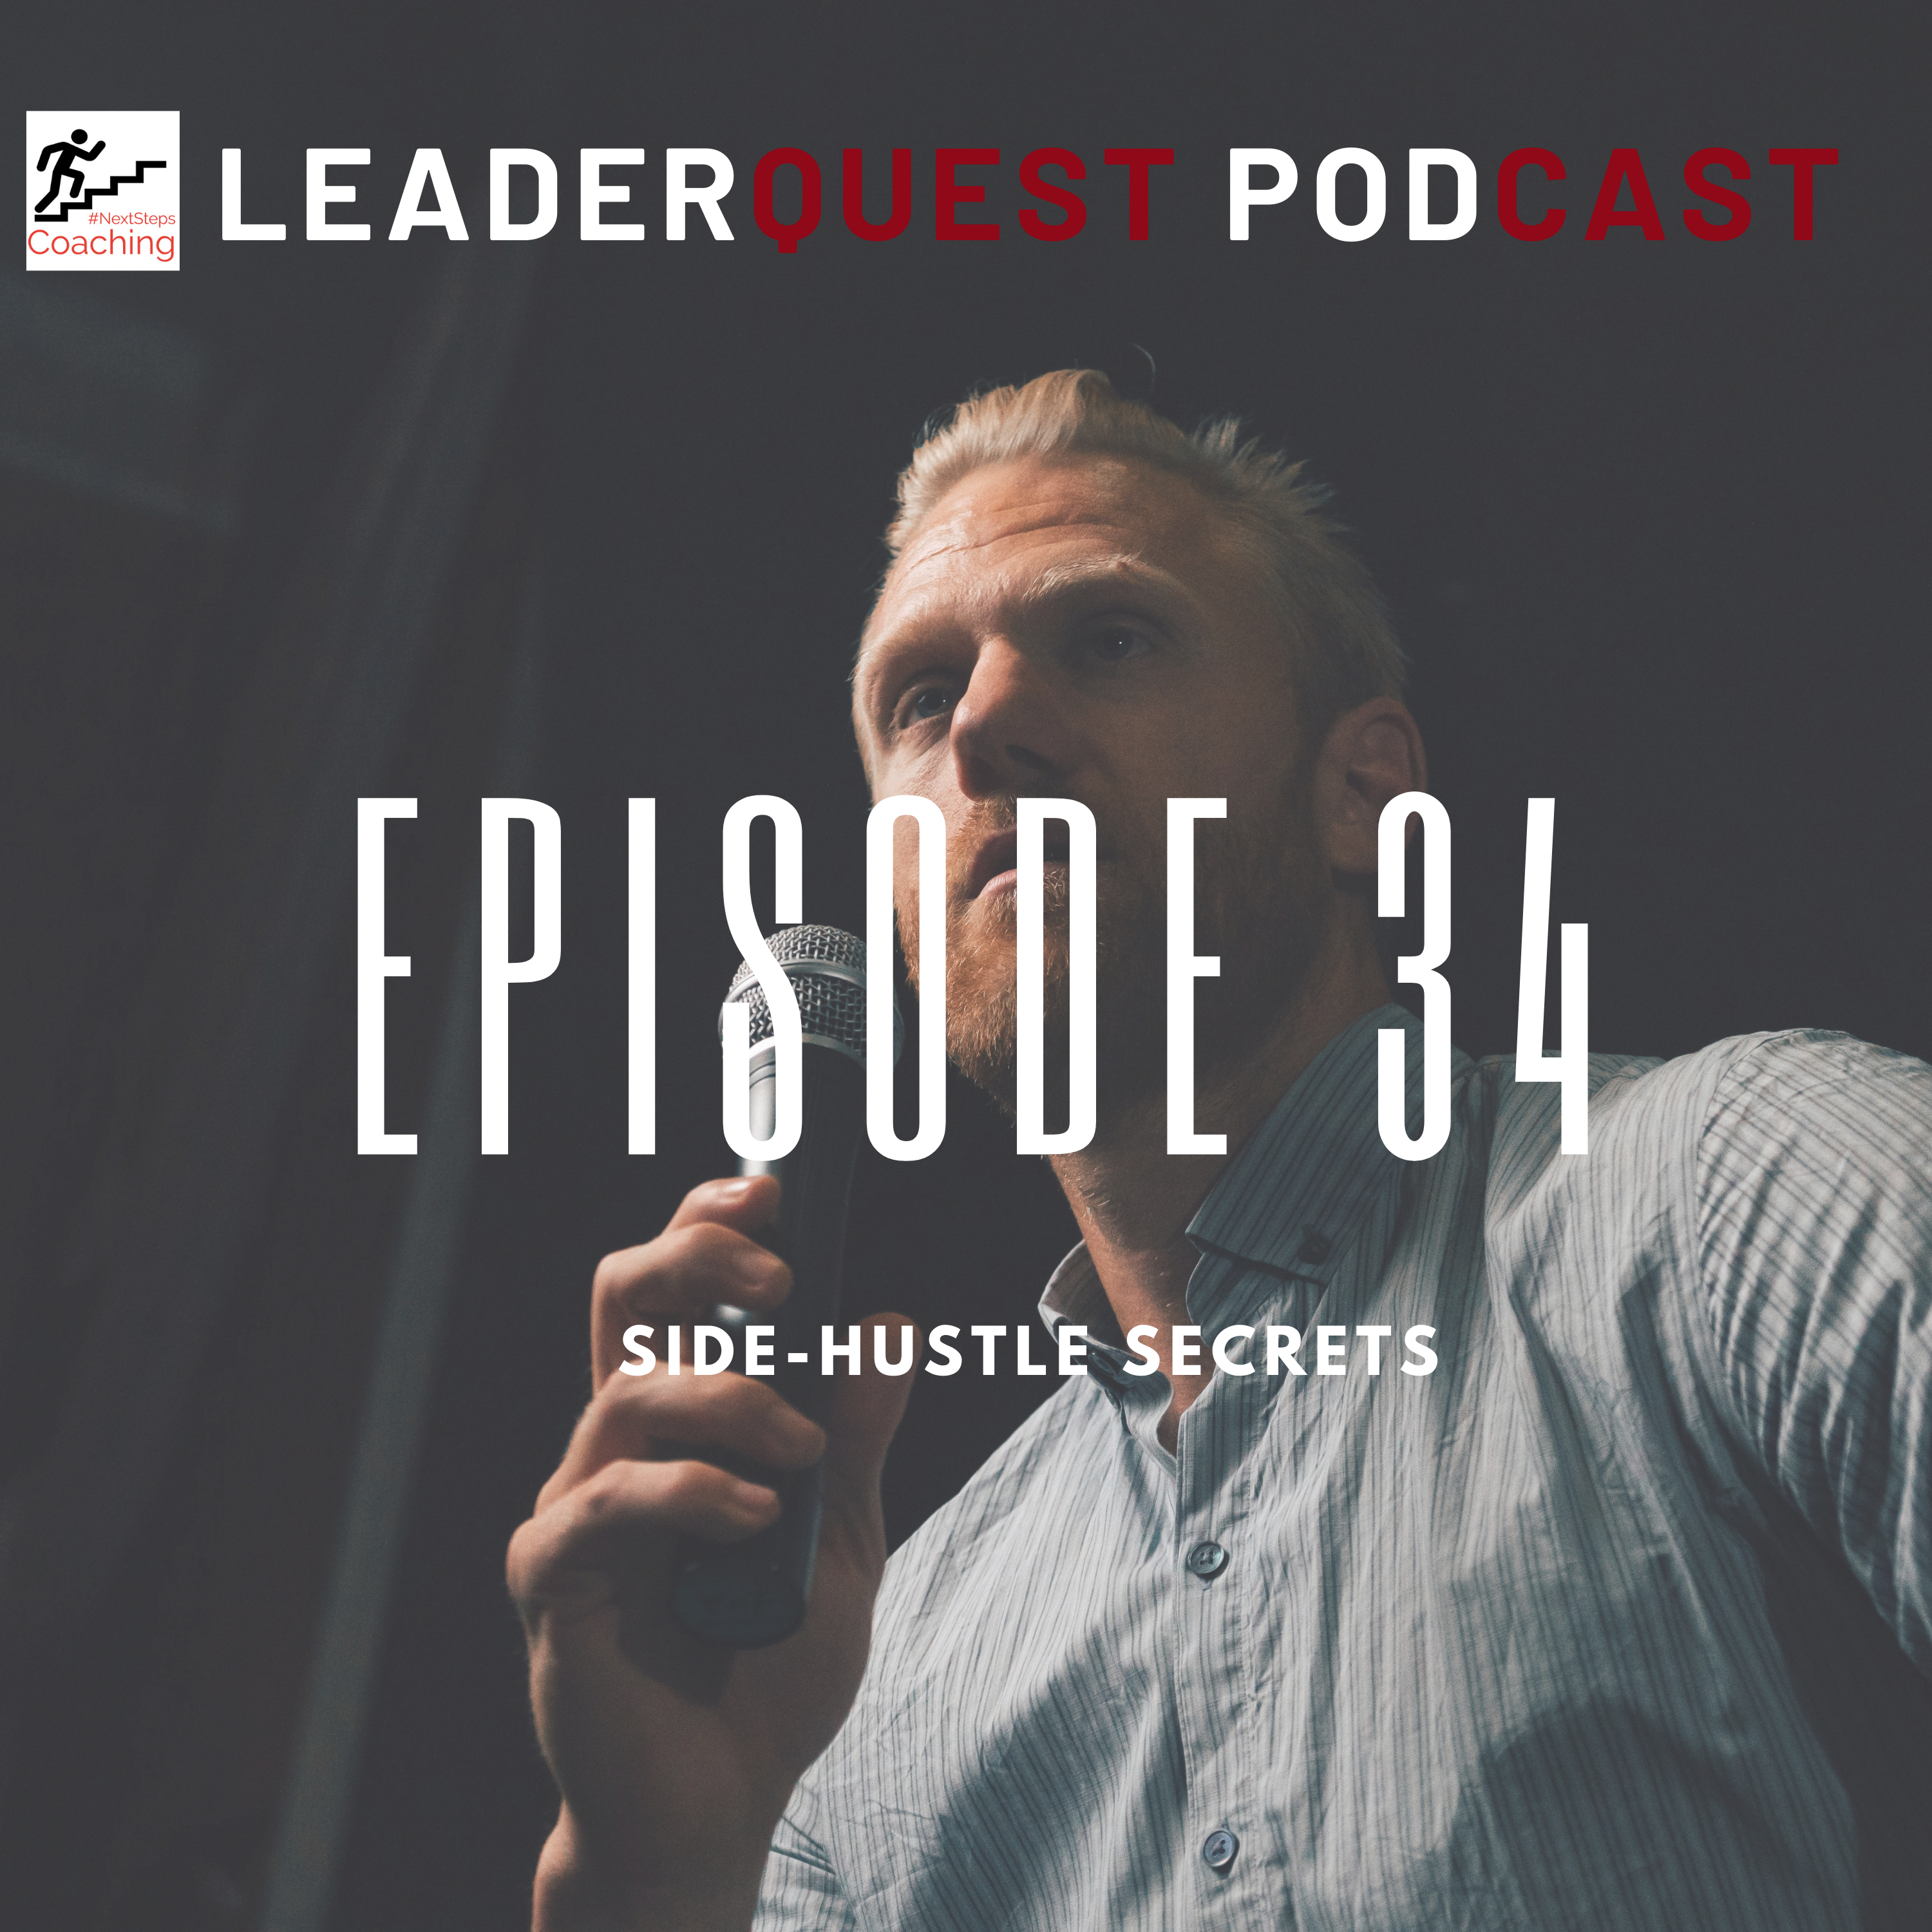 LeaderQuest Podcast cover art. Justin speaking into mic with overlay text "episode 34 side-hustle secrets."